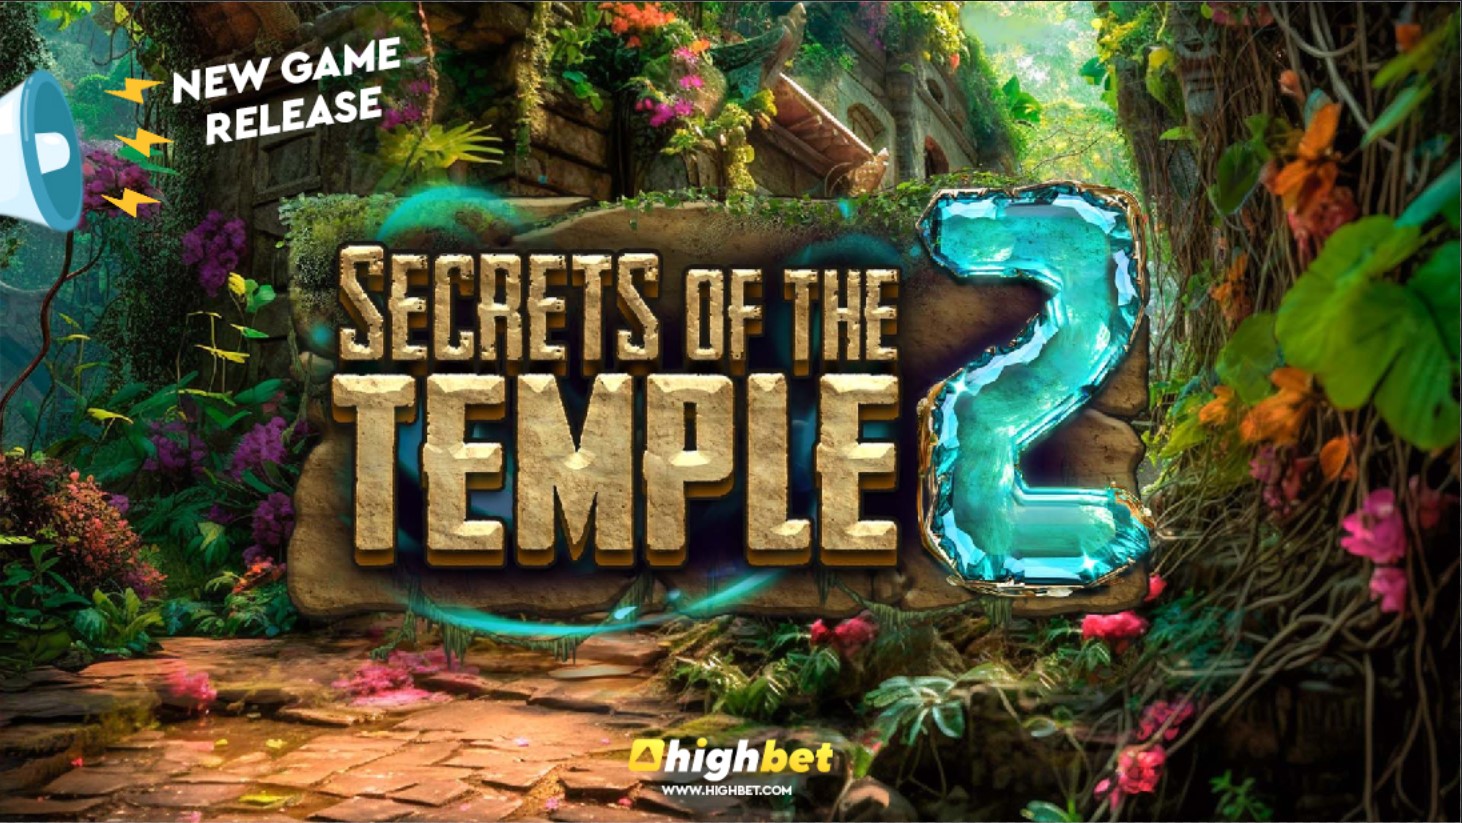 Secrets Of The Temple 2 - highbet Slot Game Review - online casino